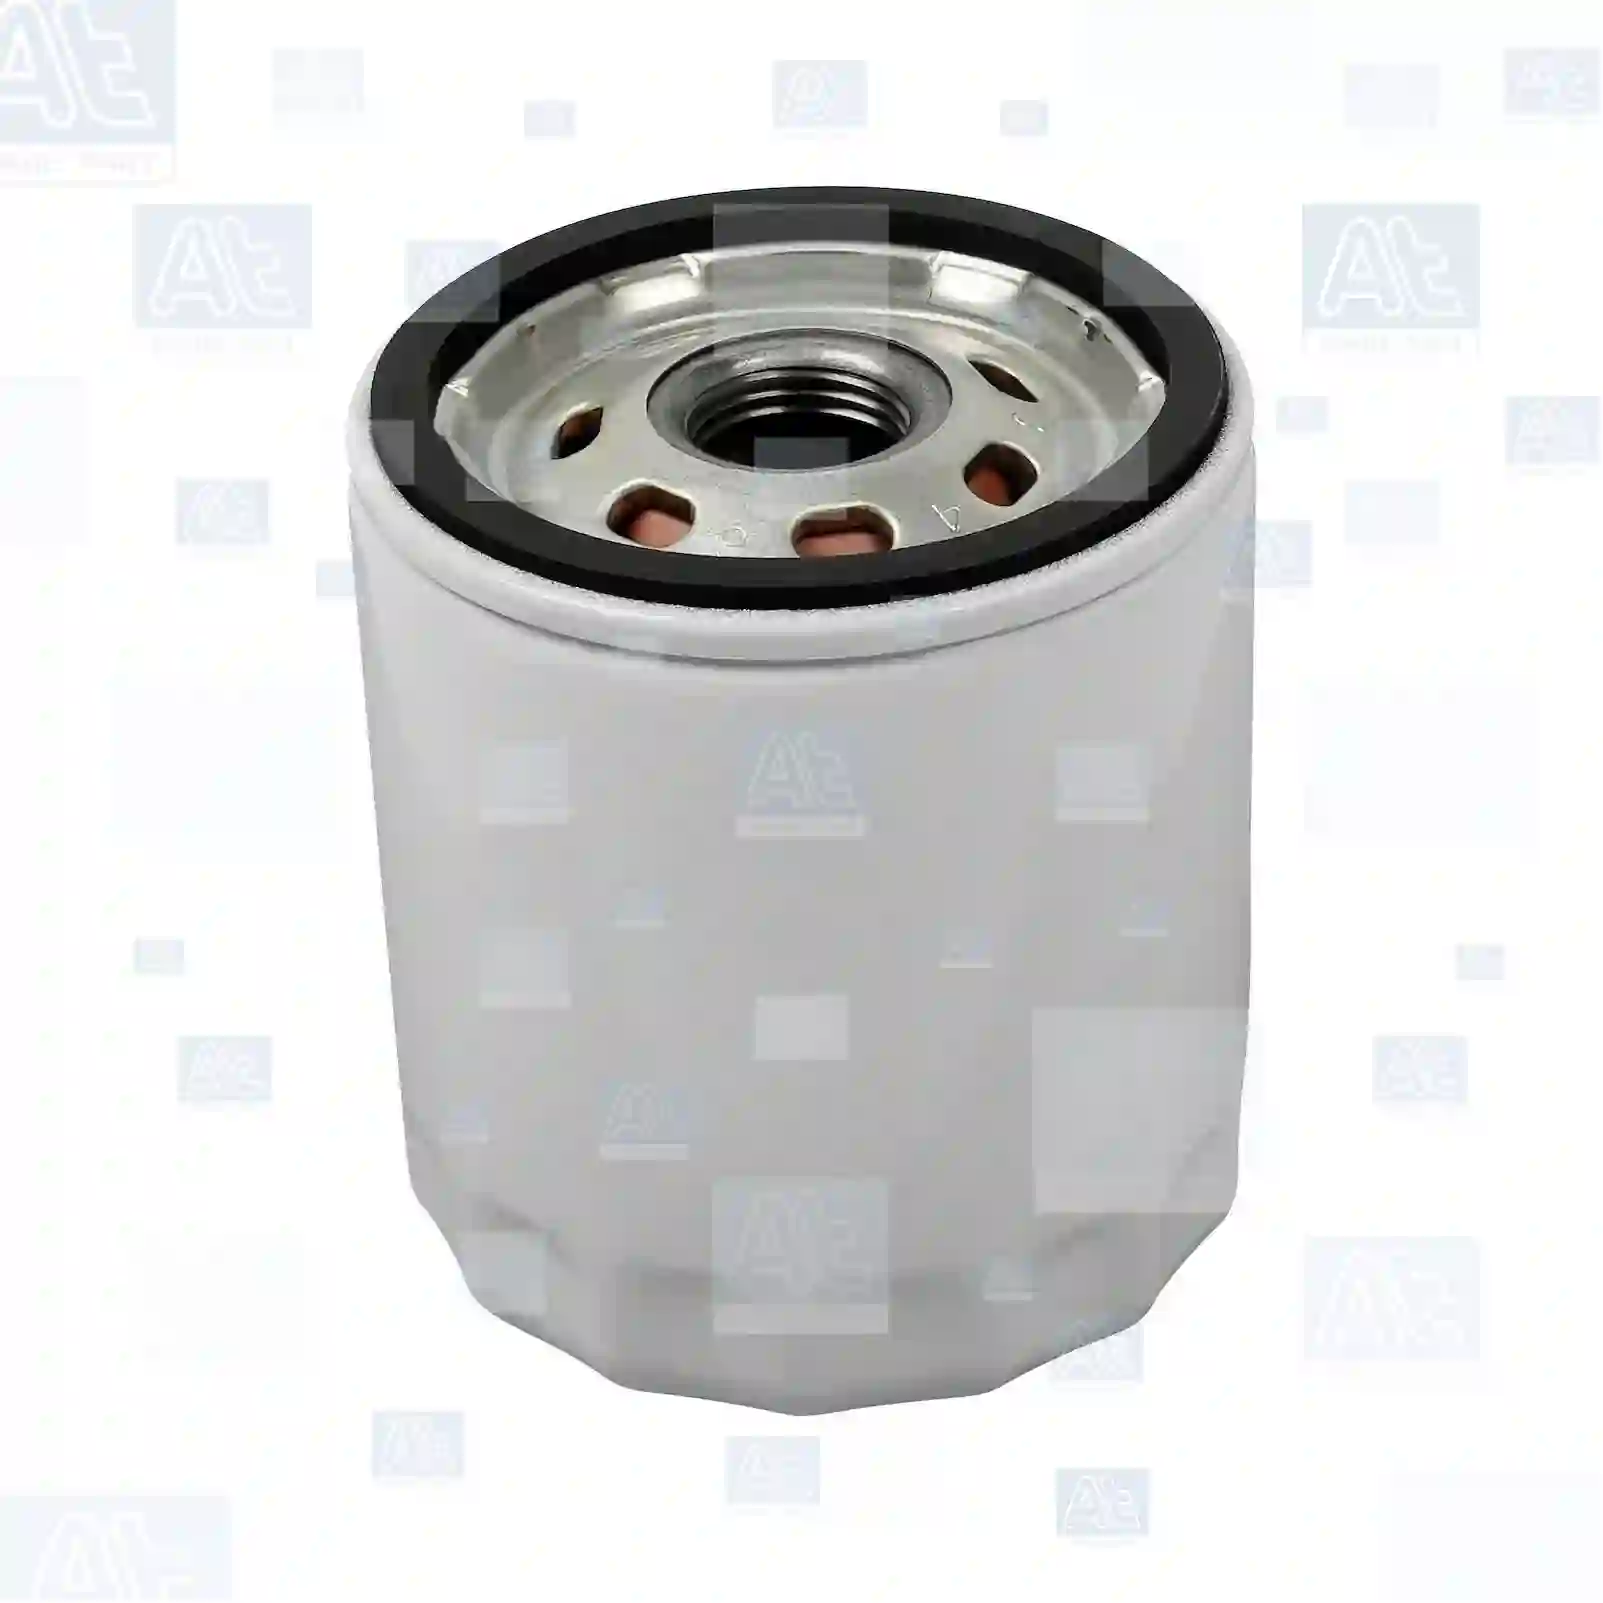 Oil filter, at no 77702326, oem no: 1007705, 1218846, 1250507, 1595247, 1751529, 1S7E-6714-BA, 1S7G-6714-CA, 1S7G-6714-DA, 1S7J-6744-BA, 5015485, 5037737, 5097737, 9W7E-6714-AA, AA6E-6714-AA, C2Z21964, LR025306, 1E0514302, 1E0514302A, 1E0614302, C20114302, LF0514302A, LF1014302, LF10143029A, LF1014302A, LFY114302, 30548485, 55560202, 7496144, 90490234, 9144445, 9309576, 93186554, 30711781, 30731880, 31330049, 31330050 At Spare Part | Engine, Accelerator Pedal, Camshaft, Connecting Rod, Crankcase, Crankshaft, Cylinder Head, Engine Suspension Mountings, Exhaust Manifold, Exhaust Gas Recirculation, Filter Kits, Flywheel Housing, General Overhaul Kits, Engine, Intake Manifold, Oil Cleaner, Oil Cooler, Oil Filter, Oil Pump, Oil Sump, Piston & Liner, Sensor & Switch, Timing Case, Turbocharger, Cooling System, Belt Tensioner, Coolant Filter, Coolant Pipe, Corrosion Prevention Agent, Drive, Expansion Tank, Fan, Intercooler, Monitors & Gauges, Radiator, Thermostat, V-Belt / Timing belt, Water Pump, Fuel System, Electronical Injector Unit, Feed Pump, Fuel Filter, cpl., Fuel Gauge Sender,  Fuel Line, Fuel Pump, Fuel Tank, Injection Line Kit, Injection Pump, Exhaust System, Clutch & Pedal, Gearbox, Propeller Shaft, Axles, Brake System, Hubs & Wheels, Suspension, Leaf Spring, Universal Parts / Accessories, Steering, Electrical System, Cabin Oil filter, at no 77702326, oem no: 1007705, 1218846, 1250507, 1595247, 1751529, 1S7E-6714-BA, 1S7G-6714-CA, 1S7G-6714-DA, 1S7J-6744-BA, 5015485, 5037737, 5097737, 9W7E-6714-AA, AA6E-6714-AA, C2Z21964, LR025306, 1E0514302, 1E0514302A, 1E0614302, C20114302, LF0514302A, LF1014302, LF10143029A, LF1014302A, LFY114302, 30548485, 55560202, 7496144, 90490234, 9144445, 9309576, 93186554, 30711781, 30731880, 31330049, 31330050 At Spare Part | Engine, Accelerator Pedal, Camshaft, Connecting Rod, Crankcase, Crankshaft, Cylinder Head, Engine Suspension Mountings, Exhaust Manifold, Exhaust Gas Recirculation, Filter Kits, Flywheel Housing, General Overhaul Kits, Engine, Intake Manifold, Oil Cleaner, Oil Cooler, Oil Filter, Oil Pump, Oil Sump, Piston & Liner, Sensor & Switch, Timing Case, Turbocharger, Cooling System, Belt Tensioner, Coolant Filter, Coolant Pipe, Corrosion Prevention Agent, Drive, Expansion Tank, Fan, Intercooler, Monitors & Gauges, Radiator, Thermostat, V-Belt / Timing belt, Water Pump, Fuel System, Electronical Injector Unit, Feed Pump, Fuel Filter, cpl., Fuel Gauge Sender,  Fuel Line, Fuel Pump, Fuel Tank, Injection Line Kit, Injection Pump, Exhaust System, Clutch & Pedal, Gearbox, Propeller Shaft, Axles, Brake System, Hubs & Wheels, Suspension, Leaf Spring, Universal Parts / Accessories, Steering, Electrical System, Cabin